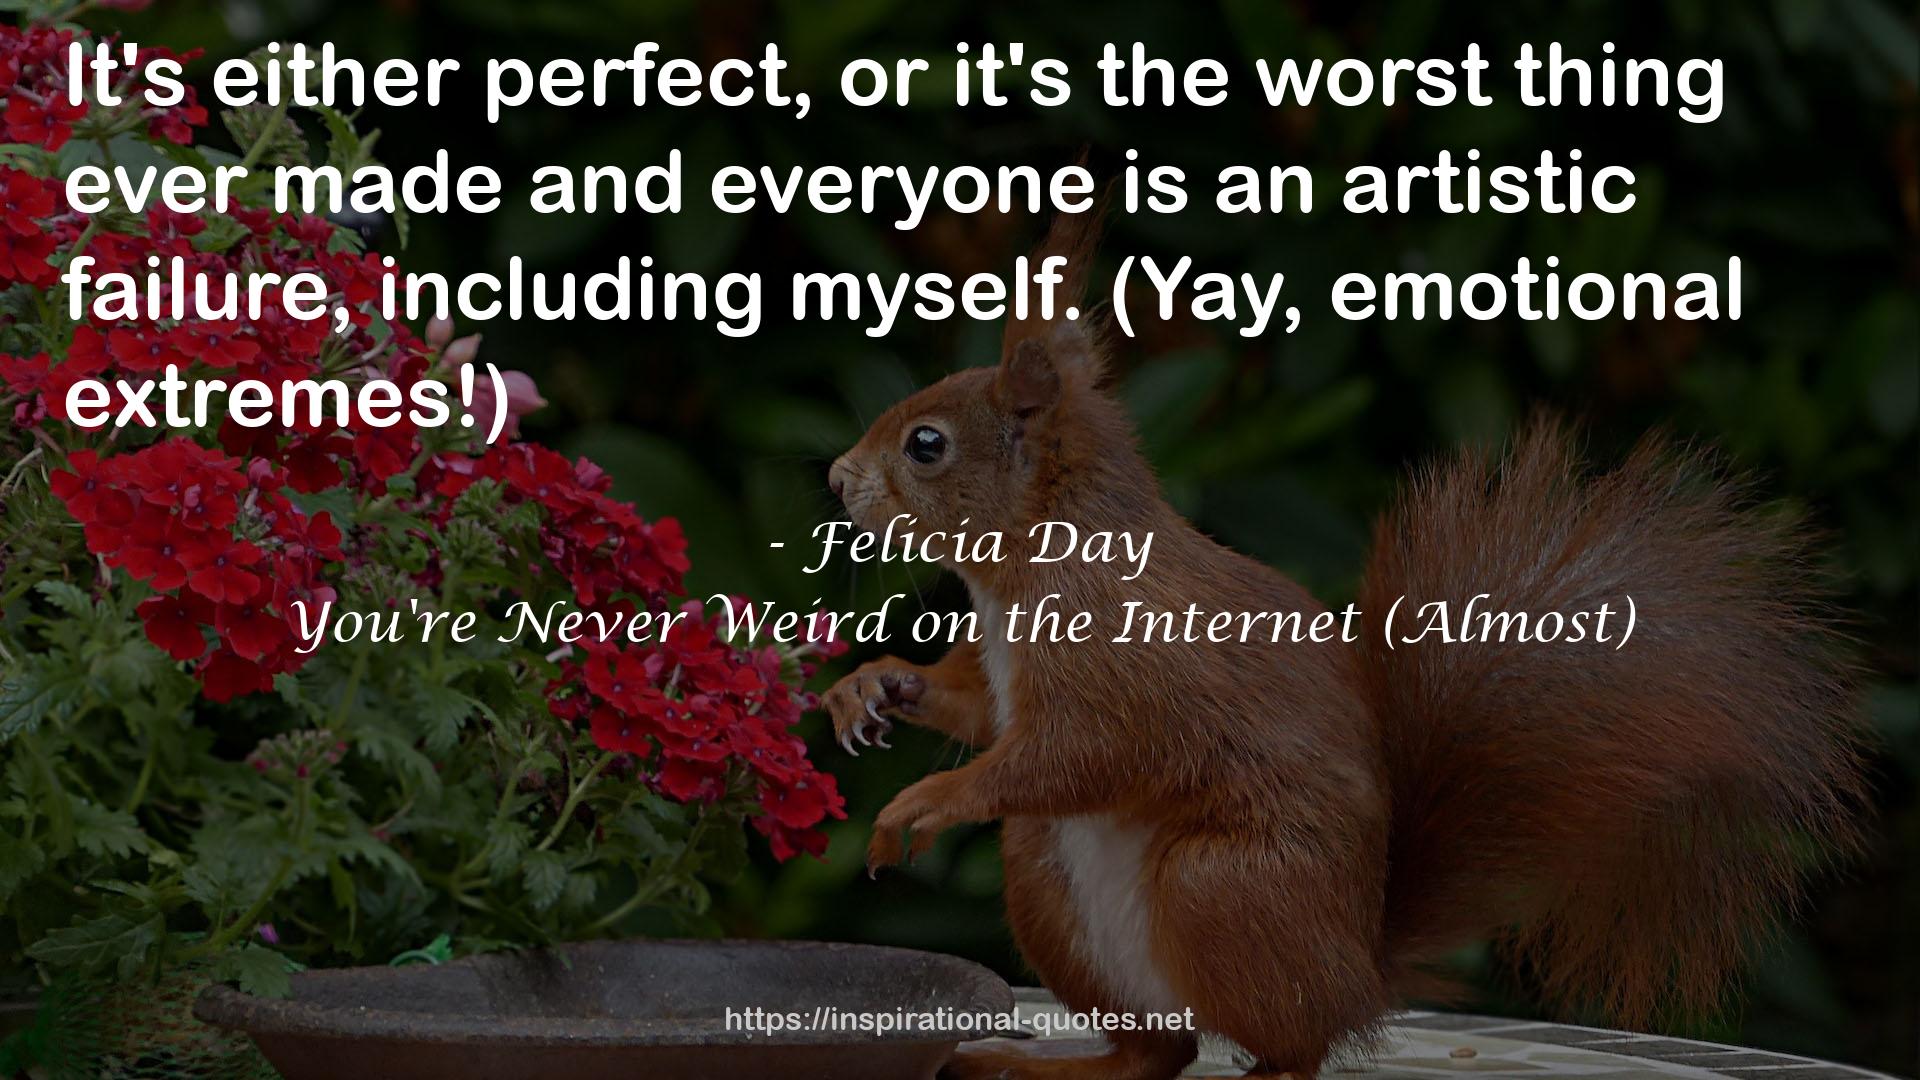 You're Never Weird on the Internet (Almost) QUOTES